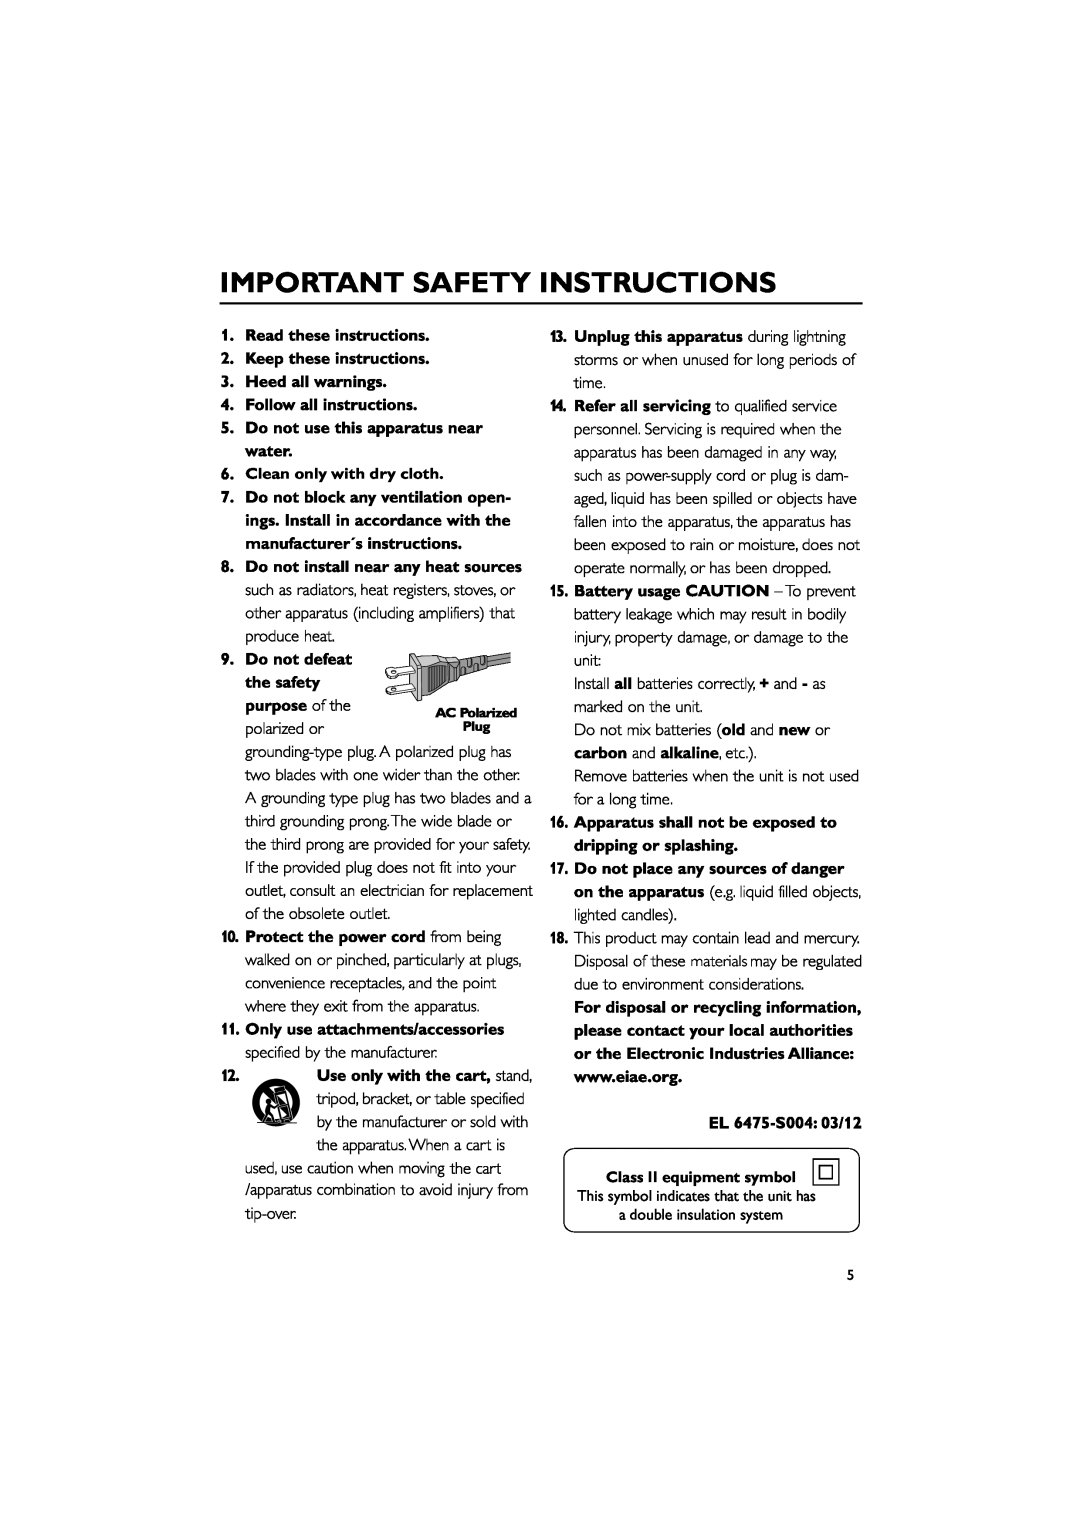 Philips MCD703 owner manual Important Safety Instructions, Clean only with dry cloth, Class II equipment symbol 